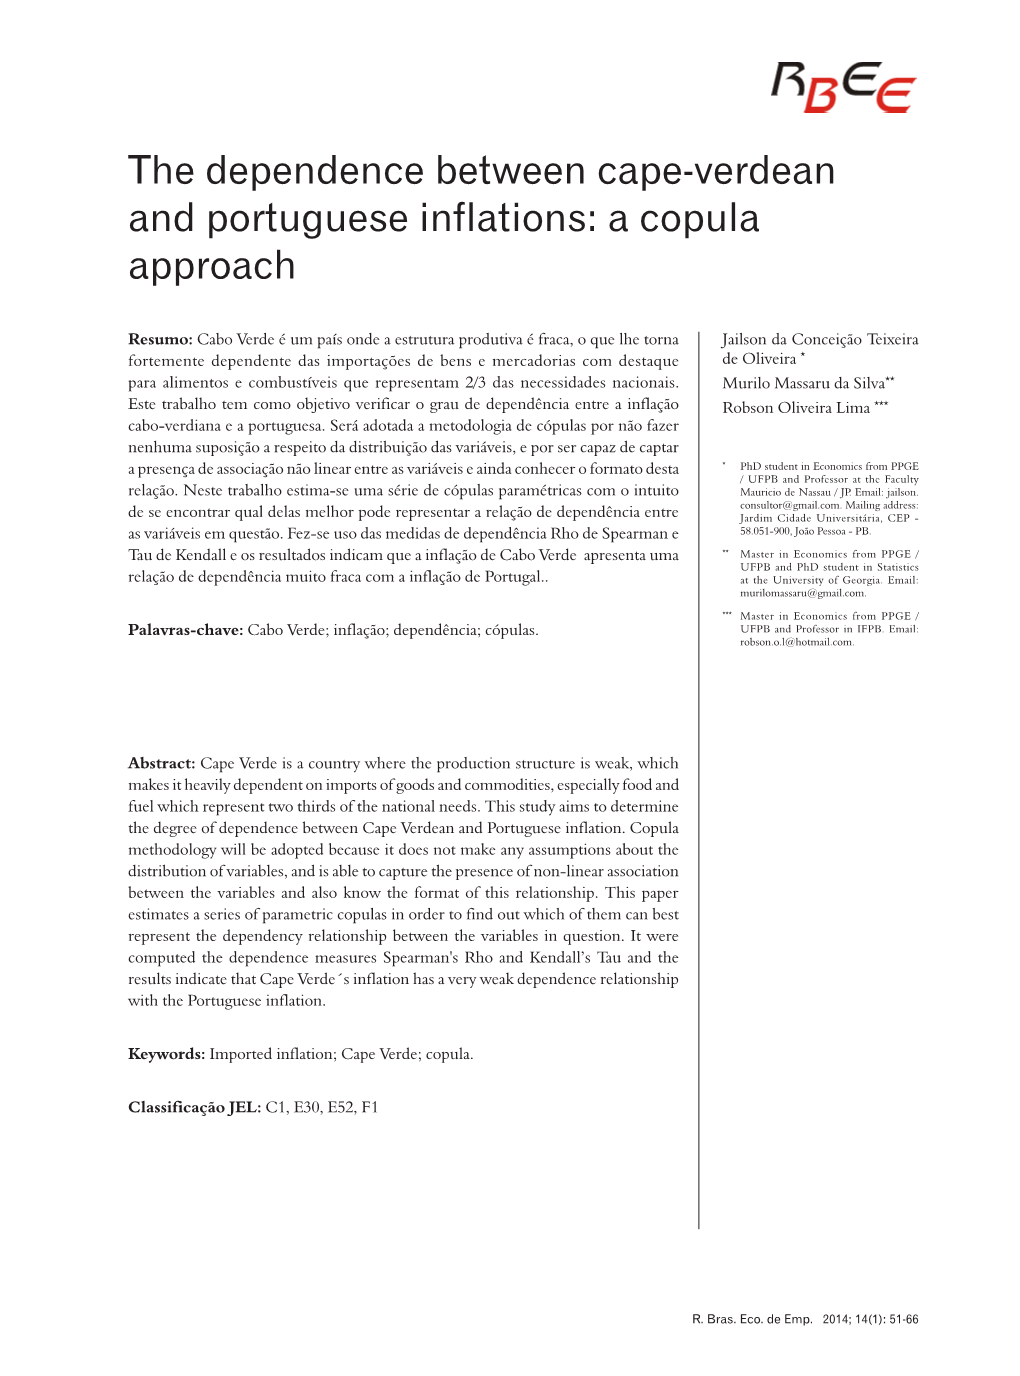 The Dependence Between Cape-Verdean and Portuguese Inflations: a Copula Approach